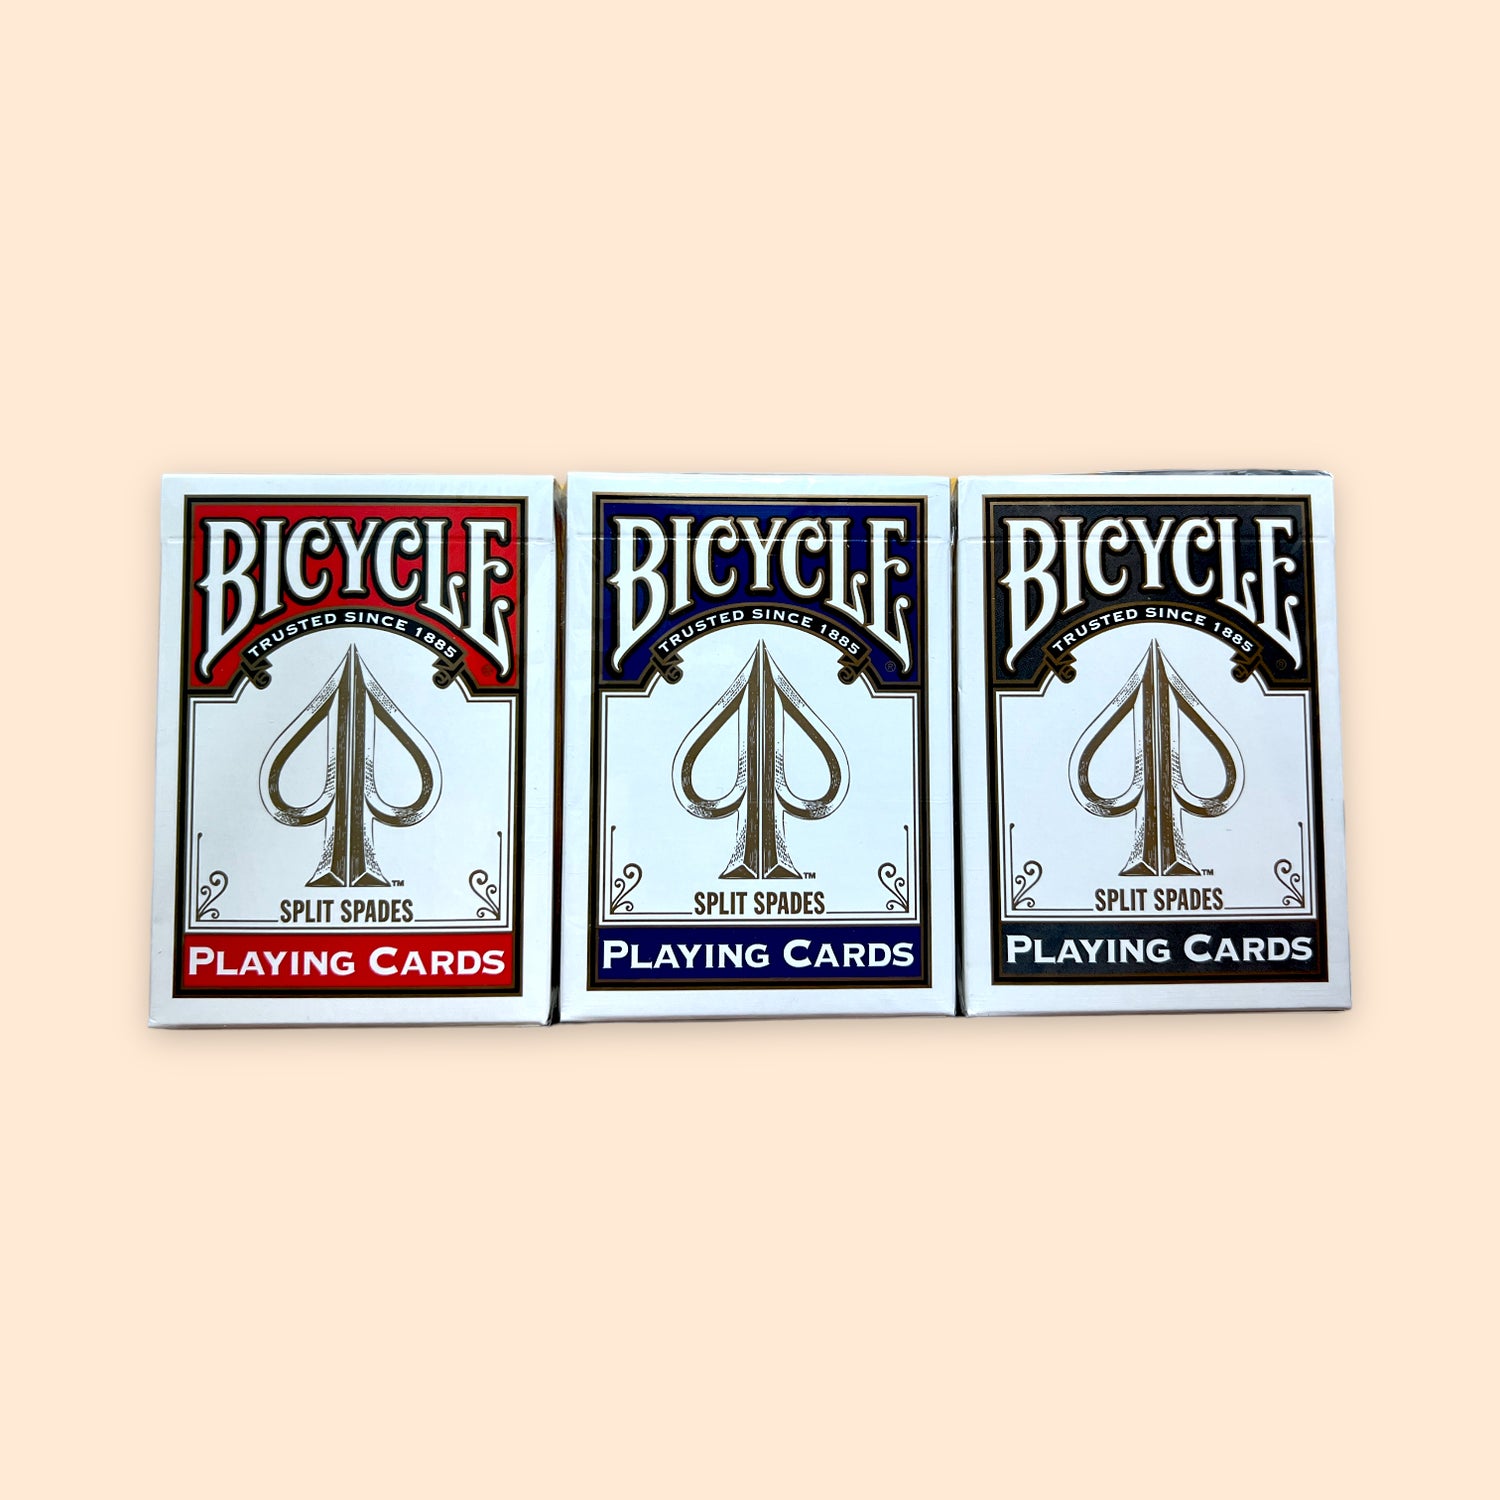 David Blaine Bicycle Discover Magic Mind Reading Transformation Playing Cards Set